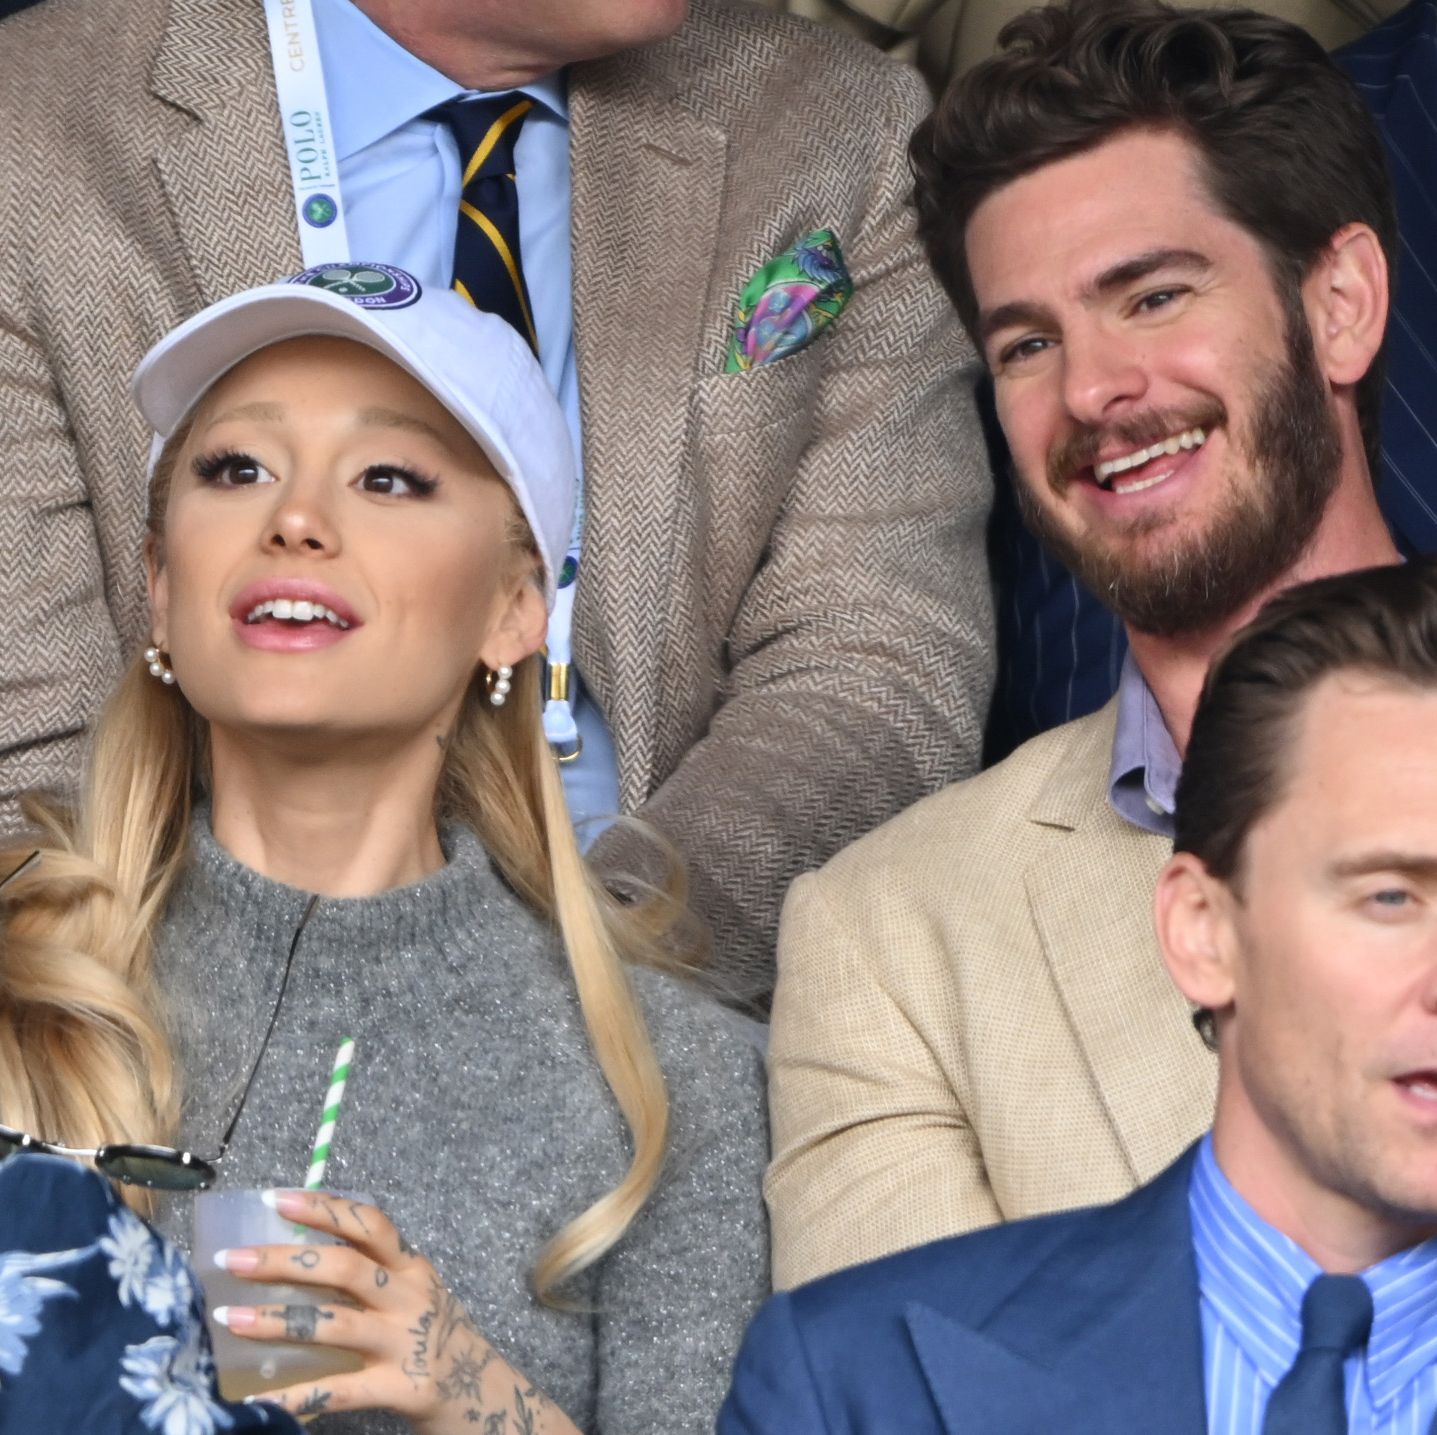 Ariana Grande Sat Next to Andrew Garfield During a Rare Appearance at Wimbledon